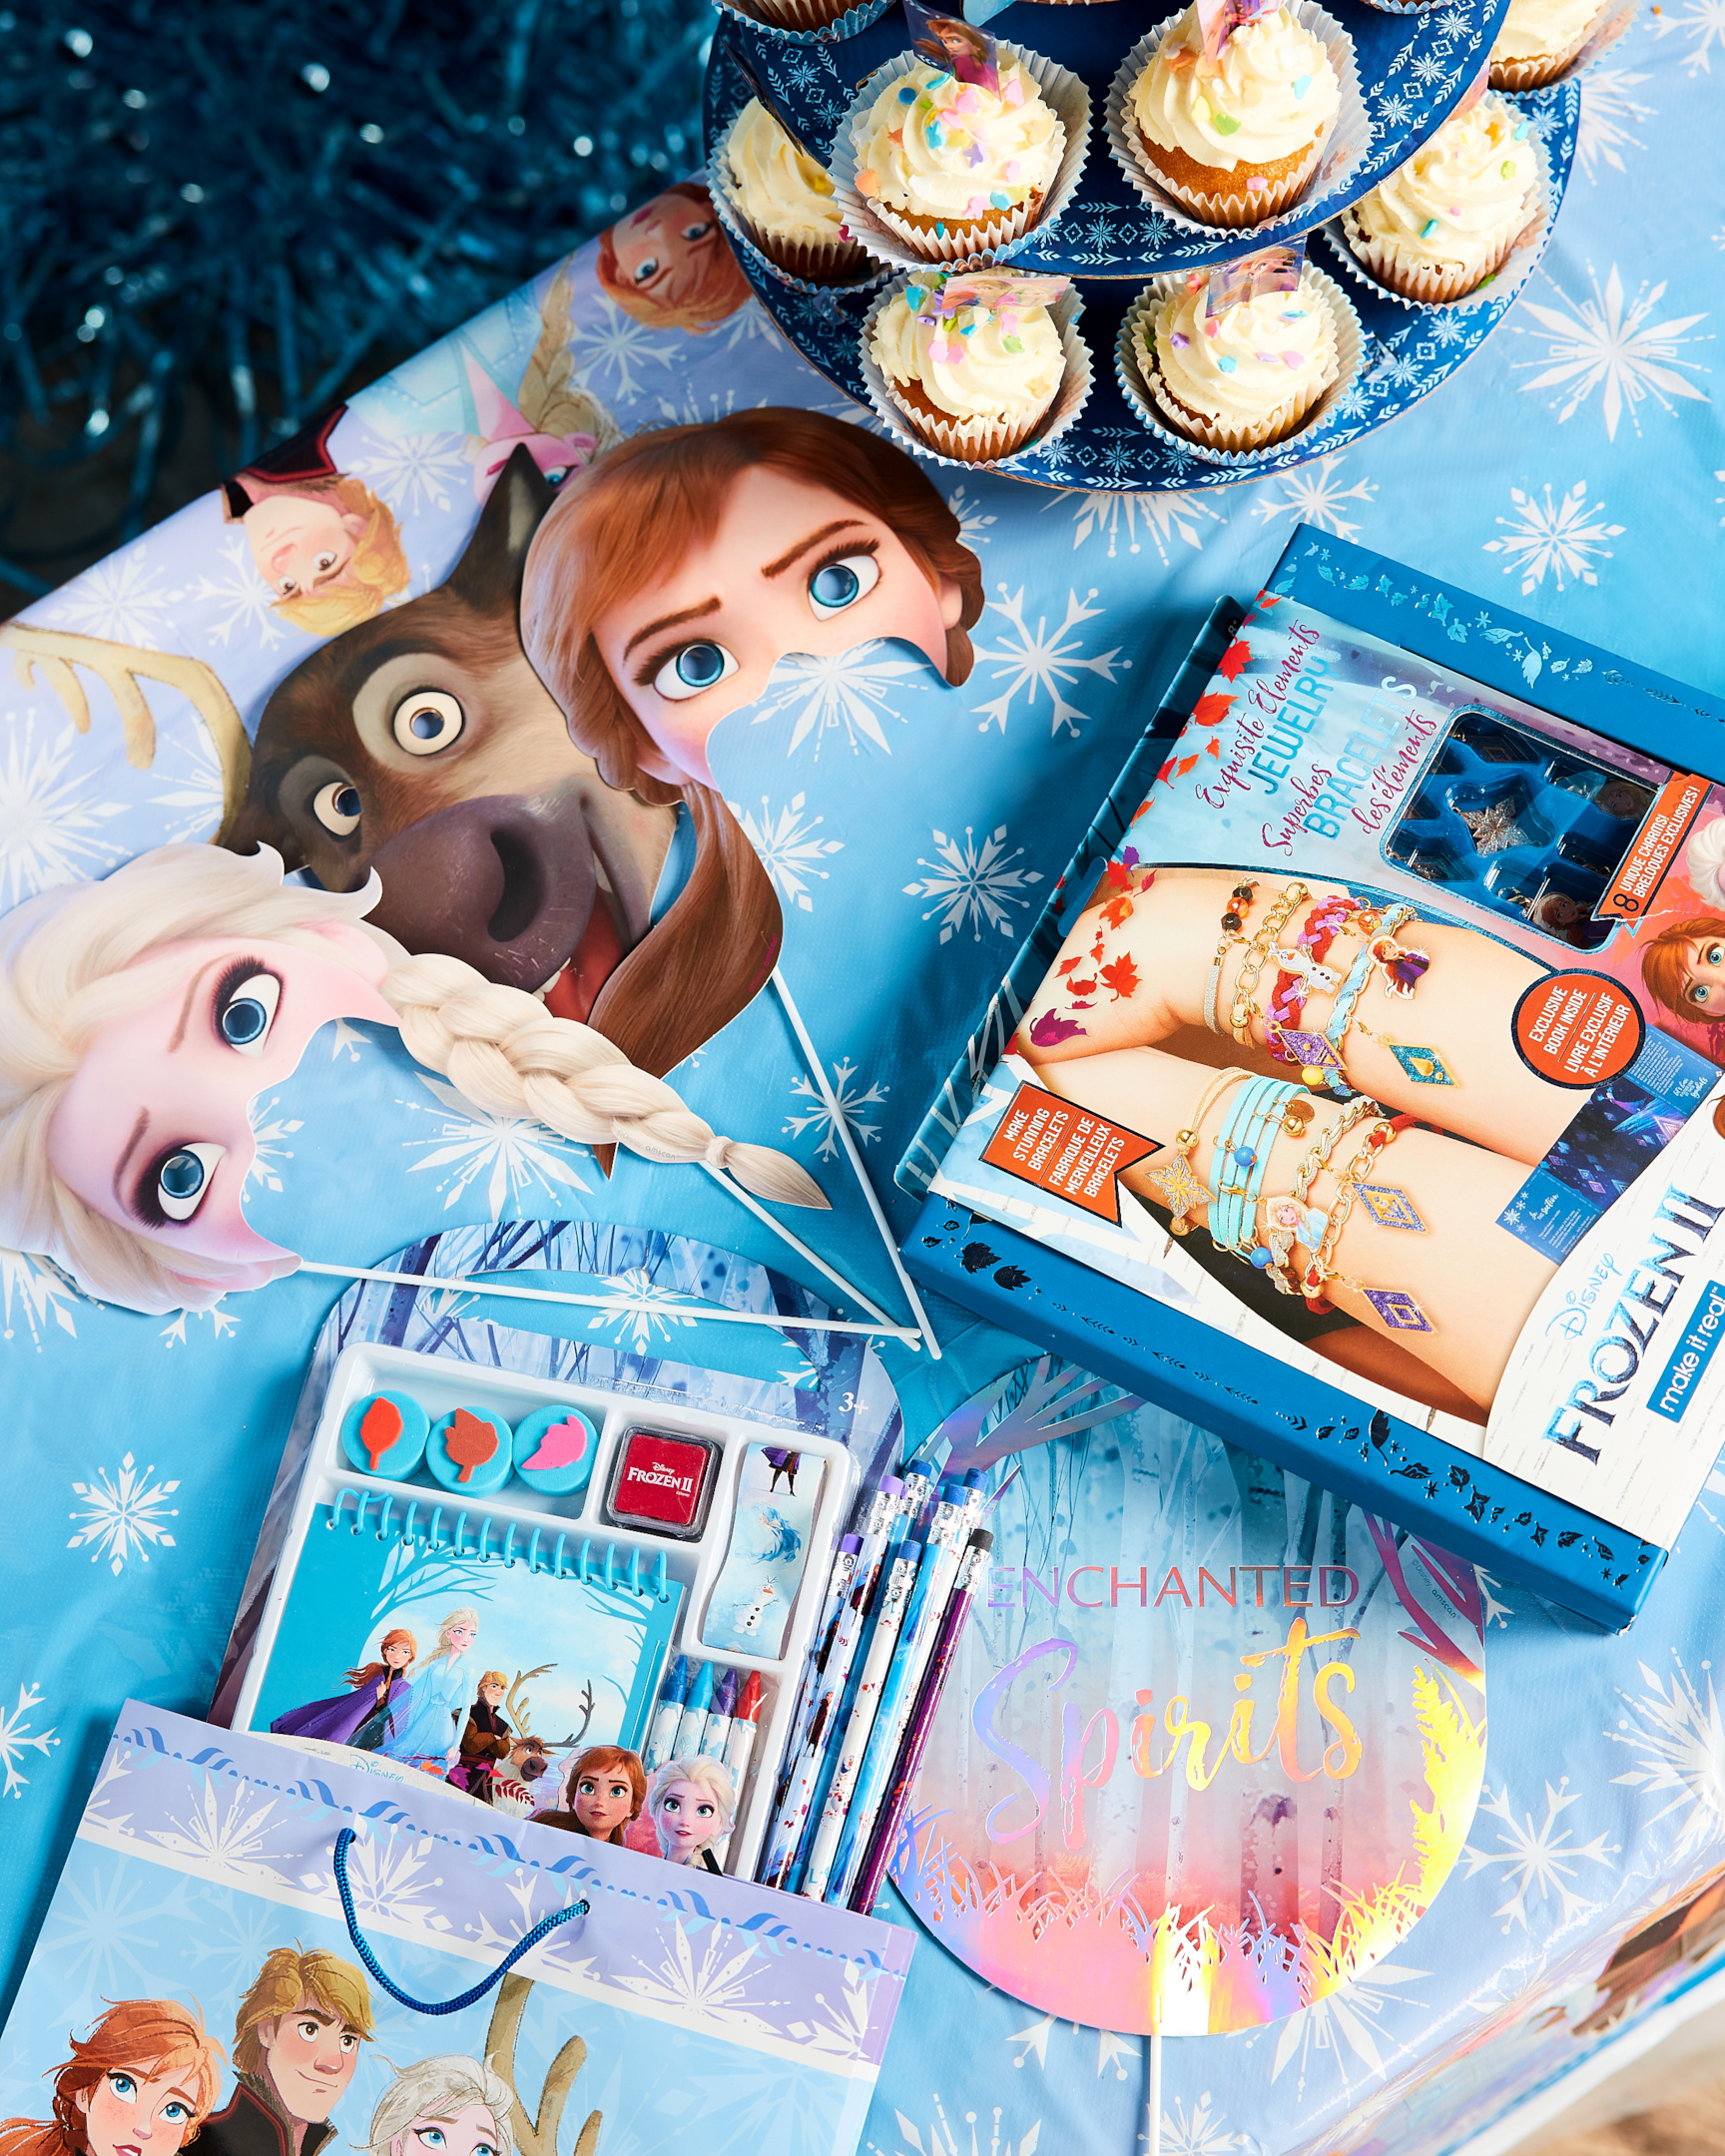 Frozen 2 party supplies and decorations.